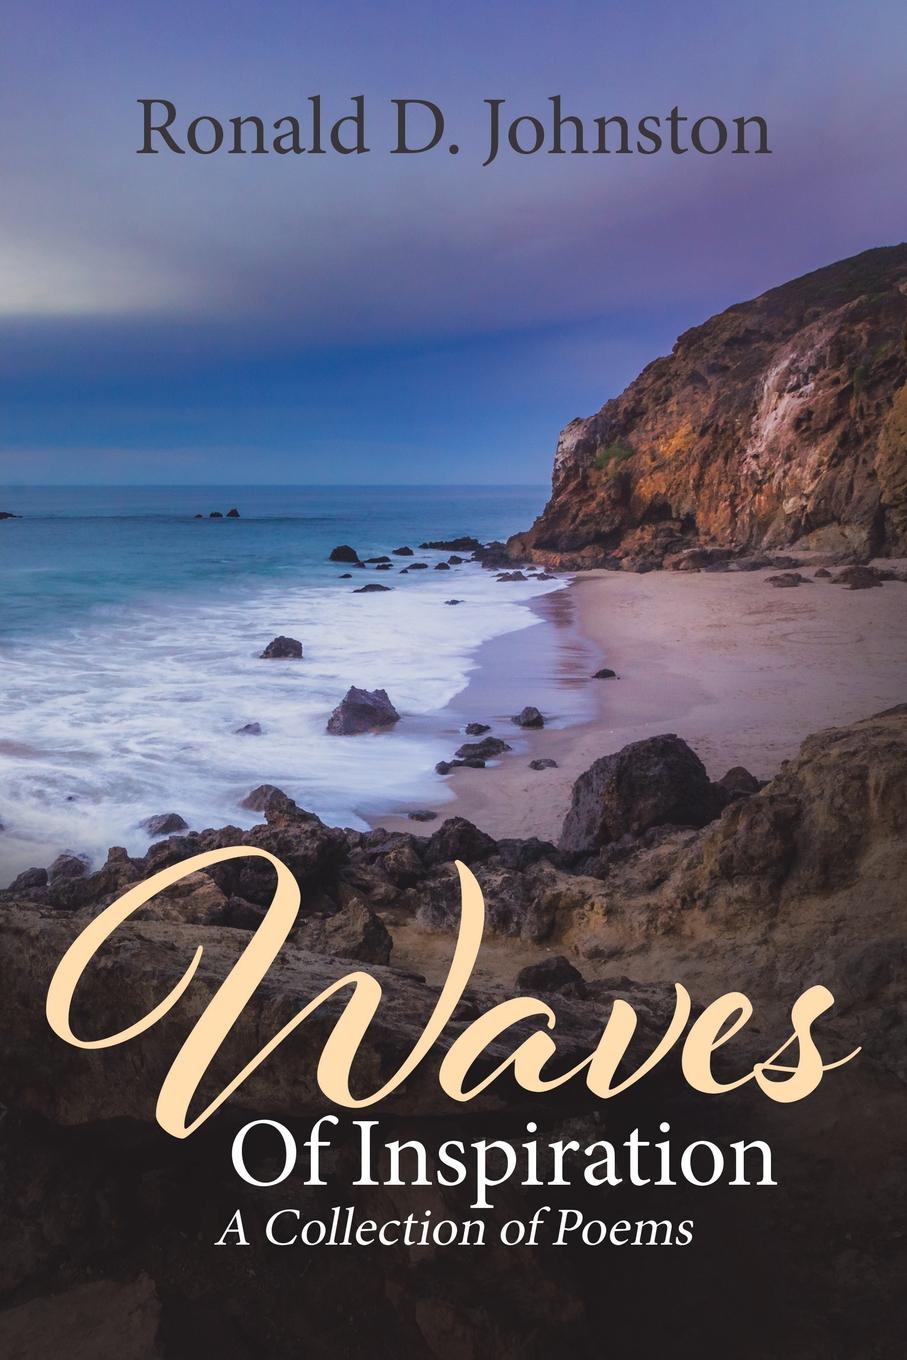 Waves Of Inspiration. A Collection of Poems